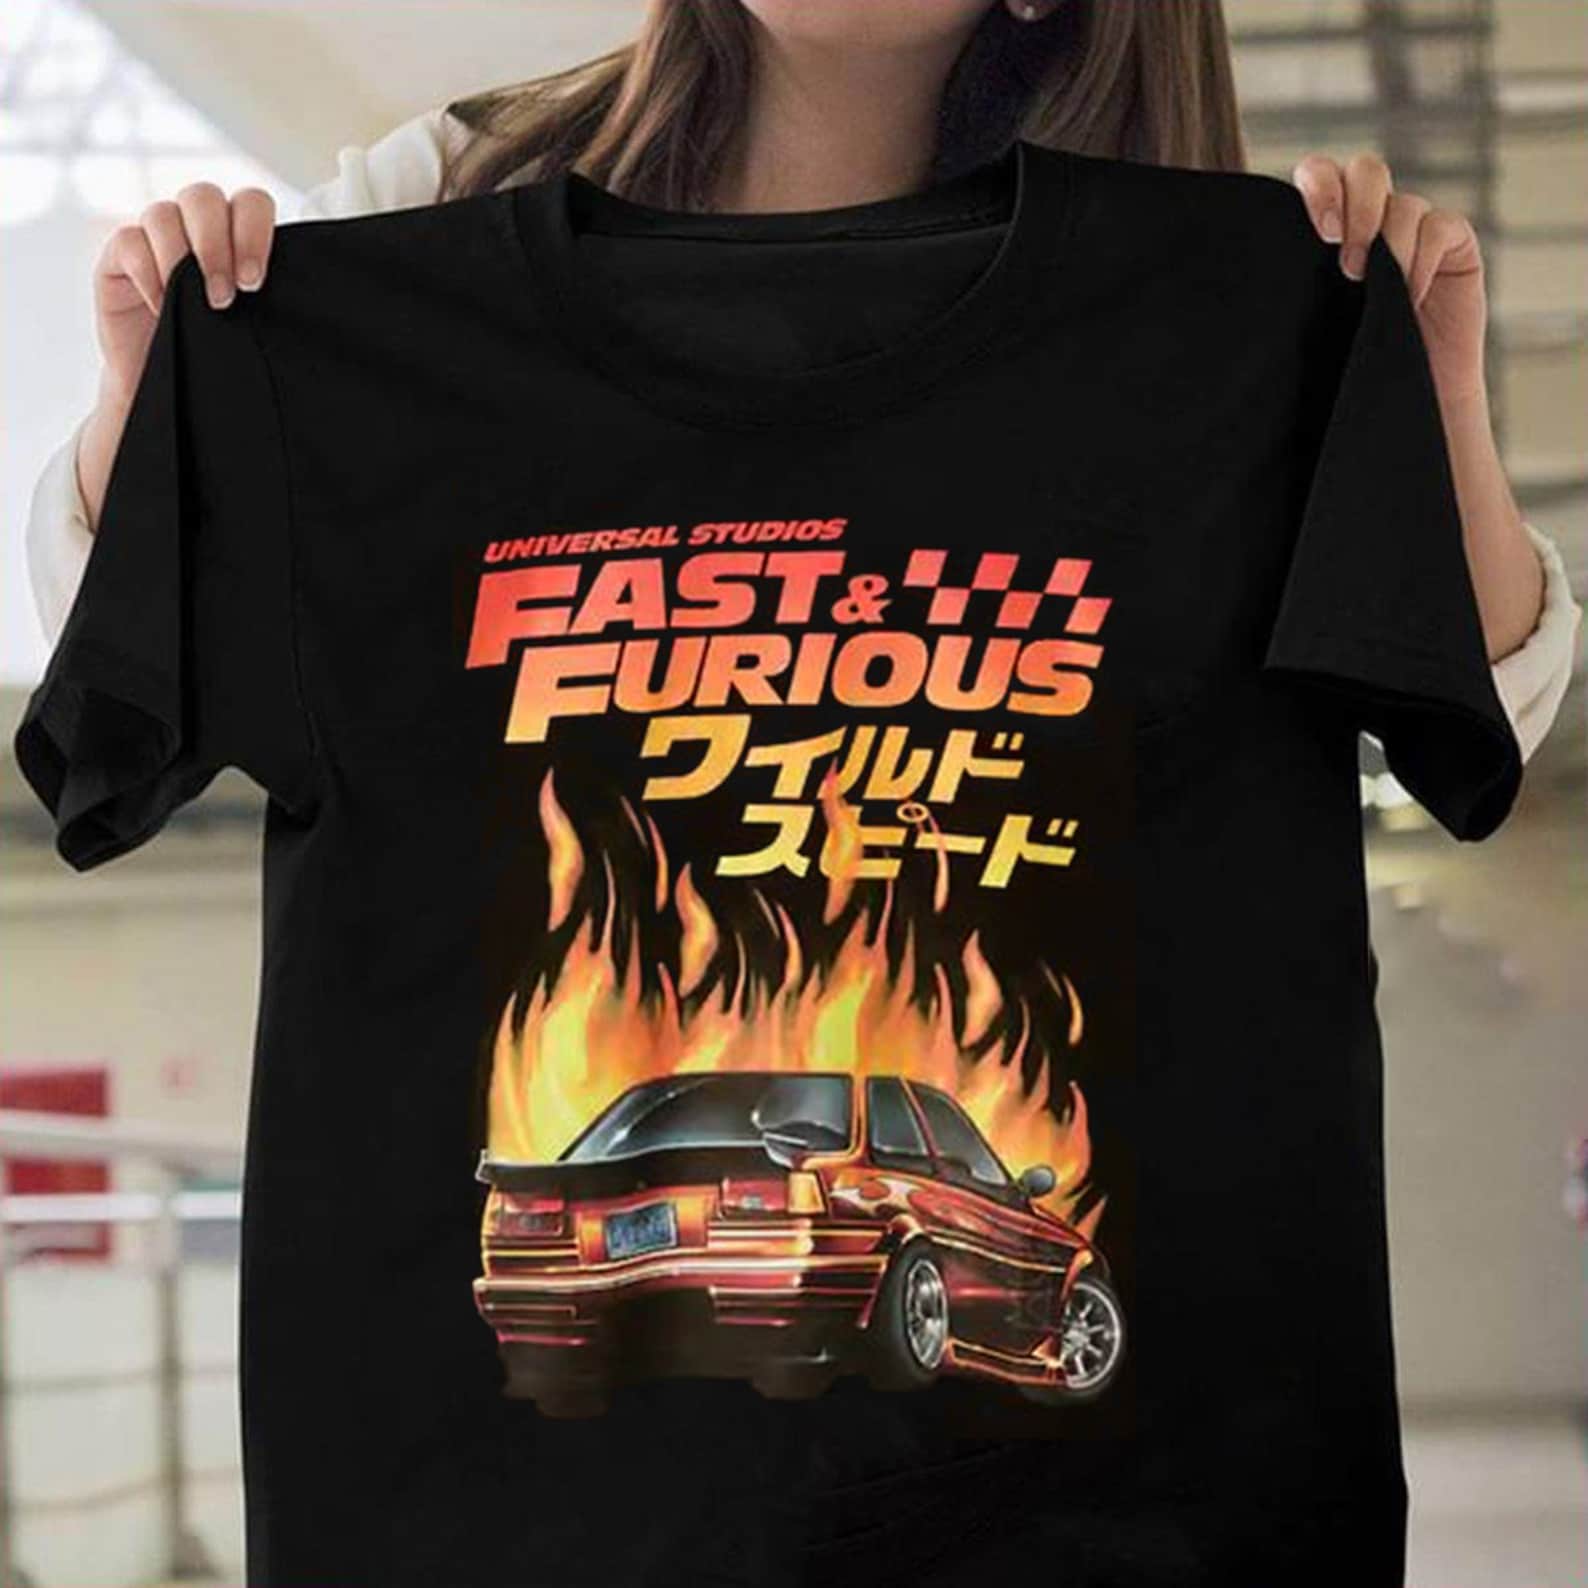 Fast & Furious T-Shirt Unisex Cotton Tee Fast And Furious | Etsy